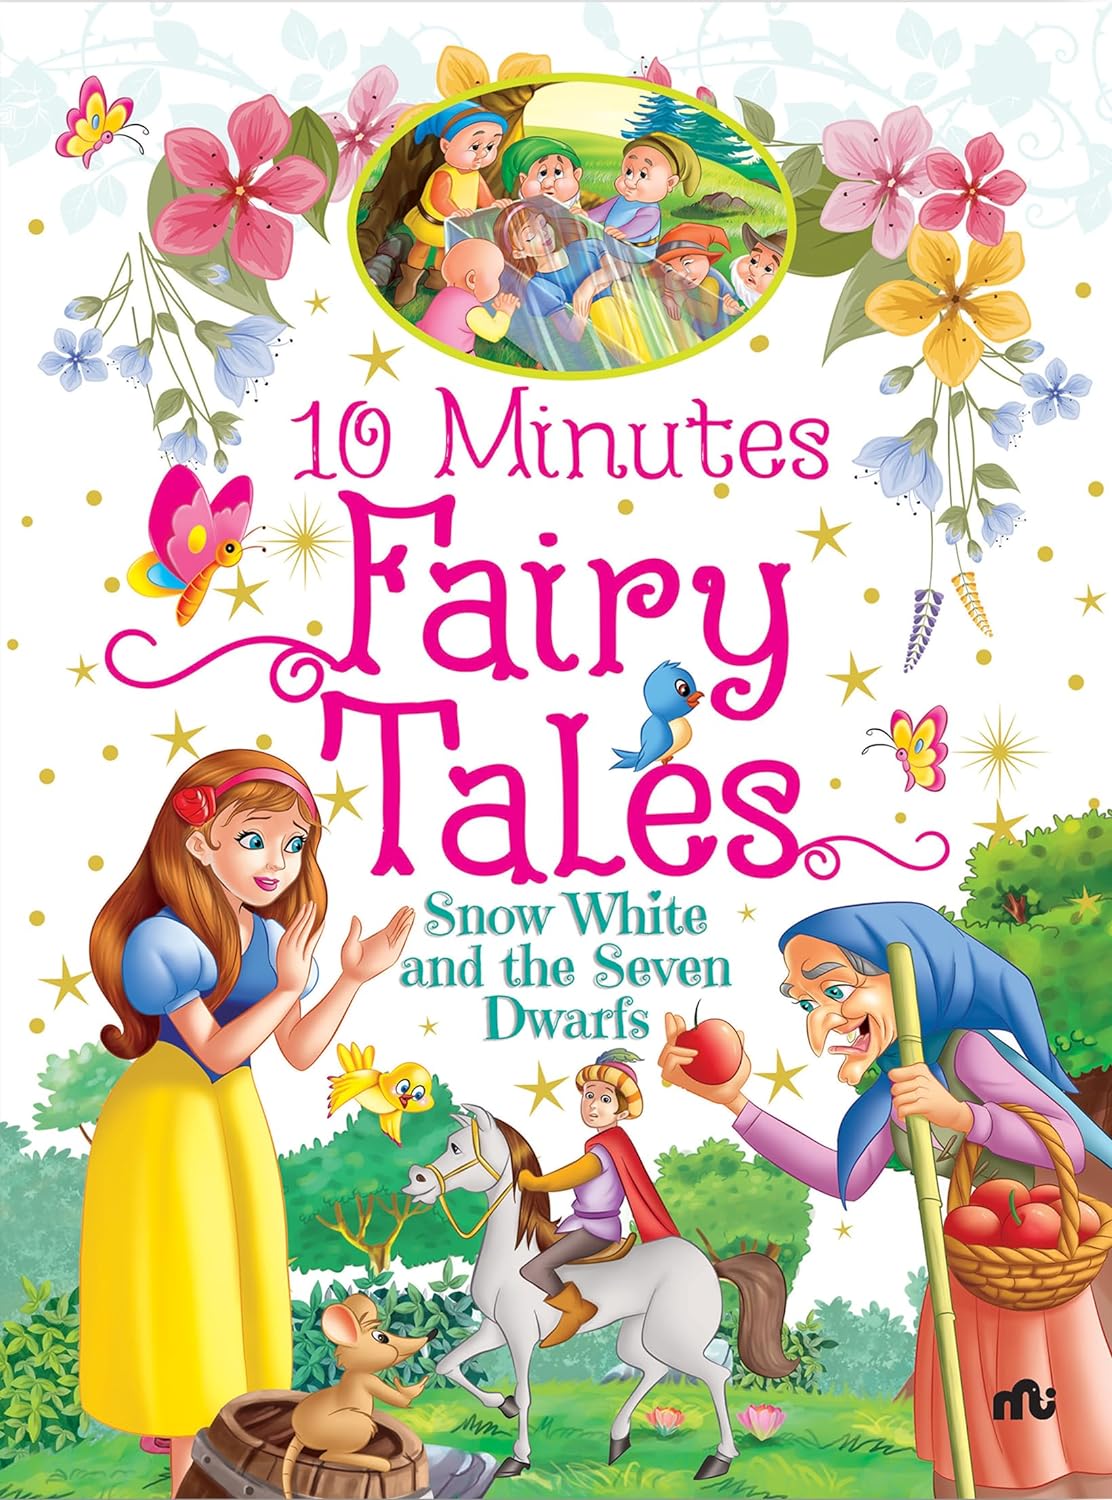 10 Minutes Fairy Tales Snow White and the Seven Dwarfs